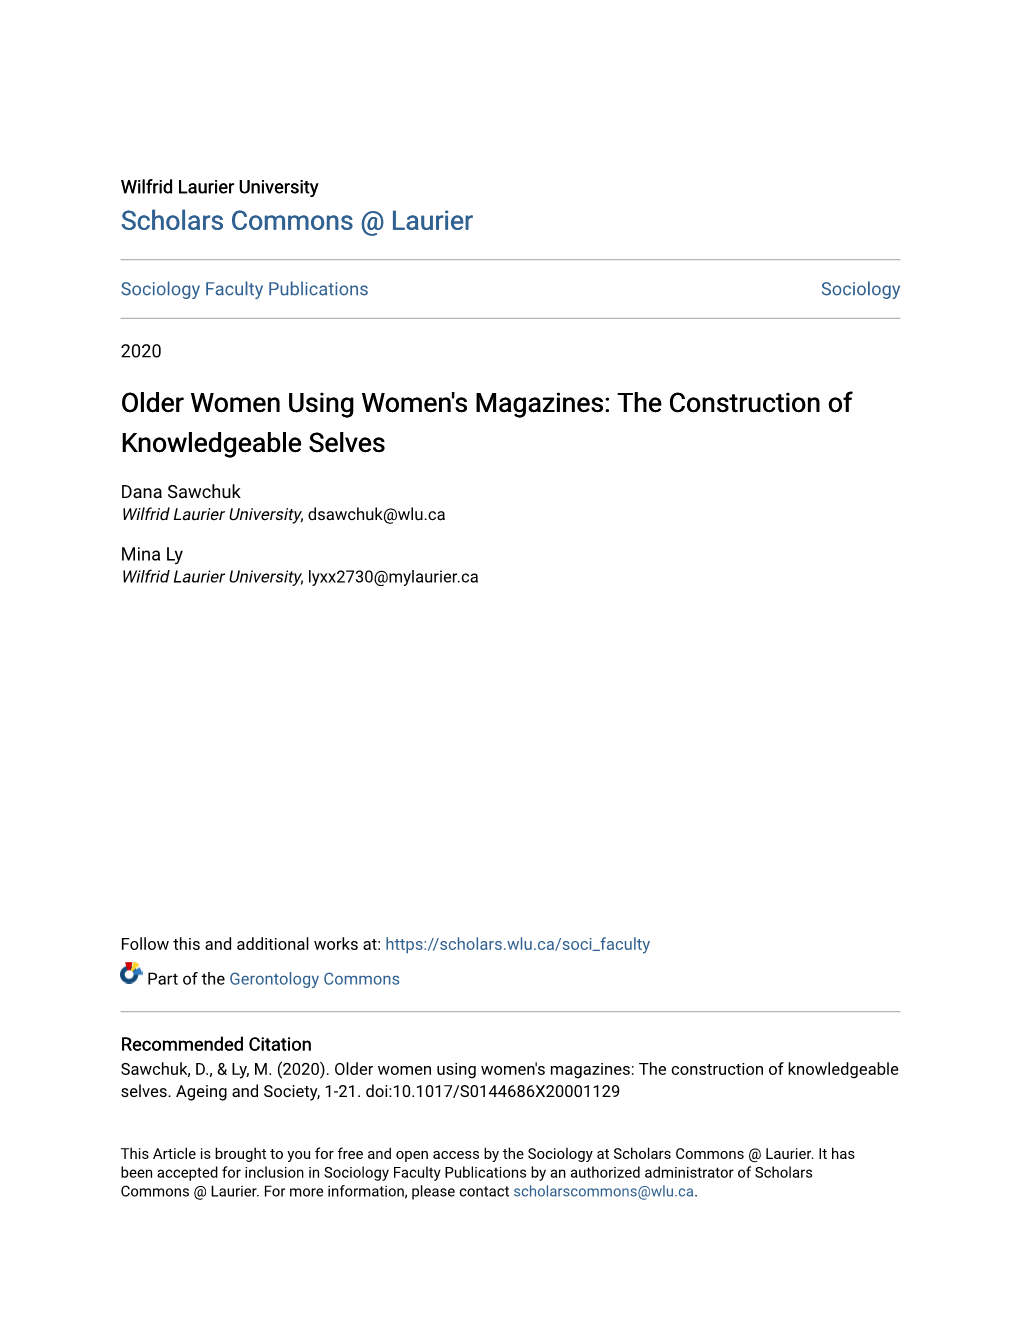 Older Women Using Women's Magazines: the Construction of Knowledgeable Selves